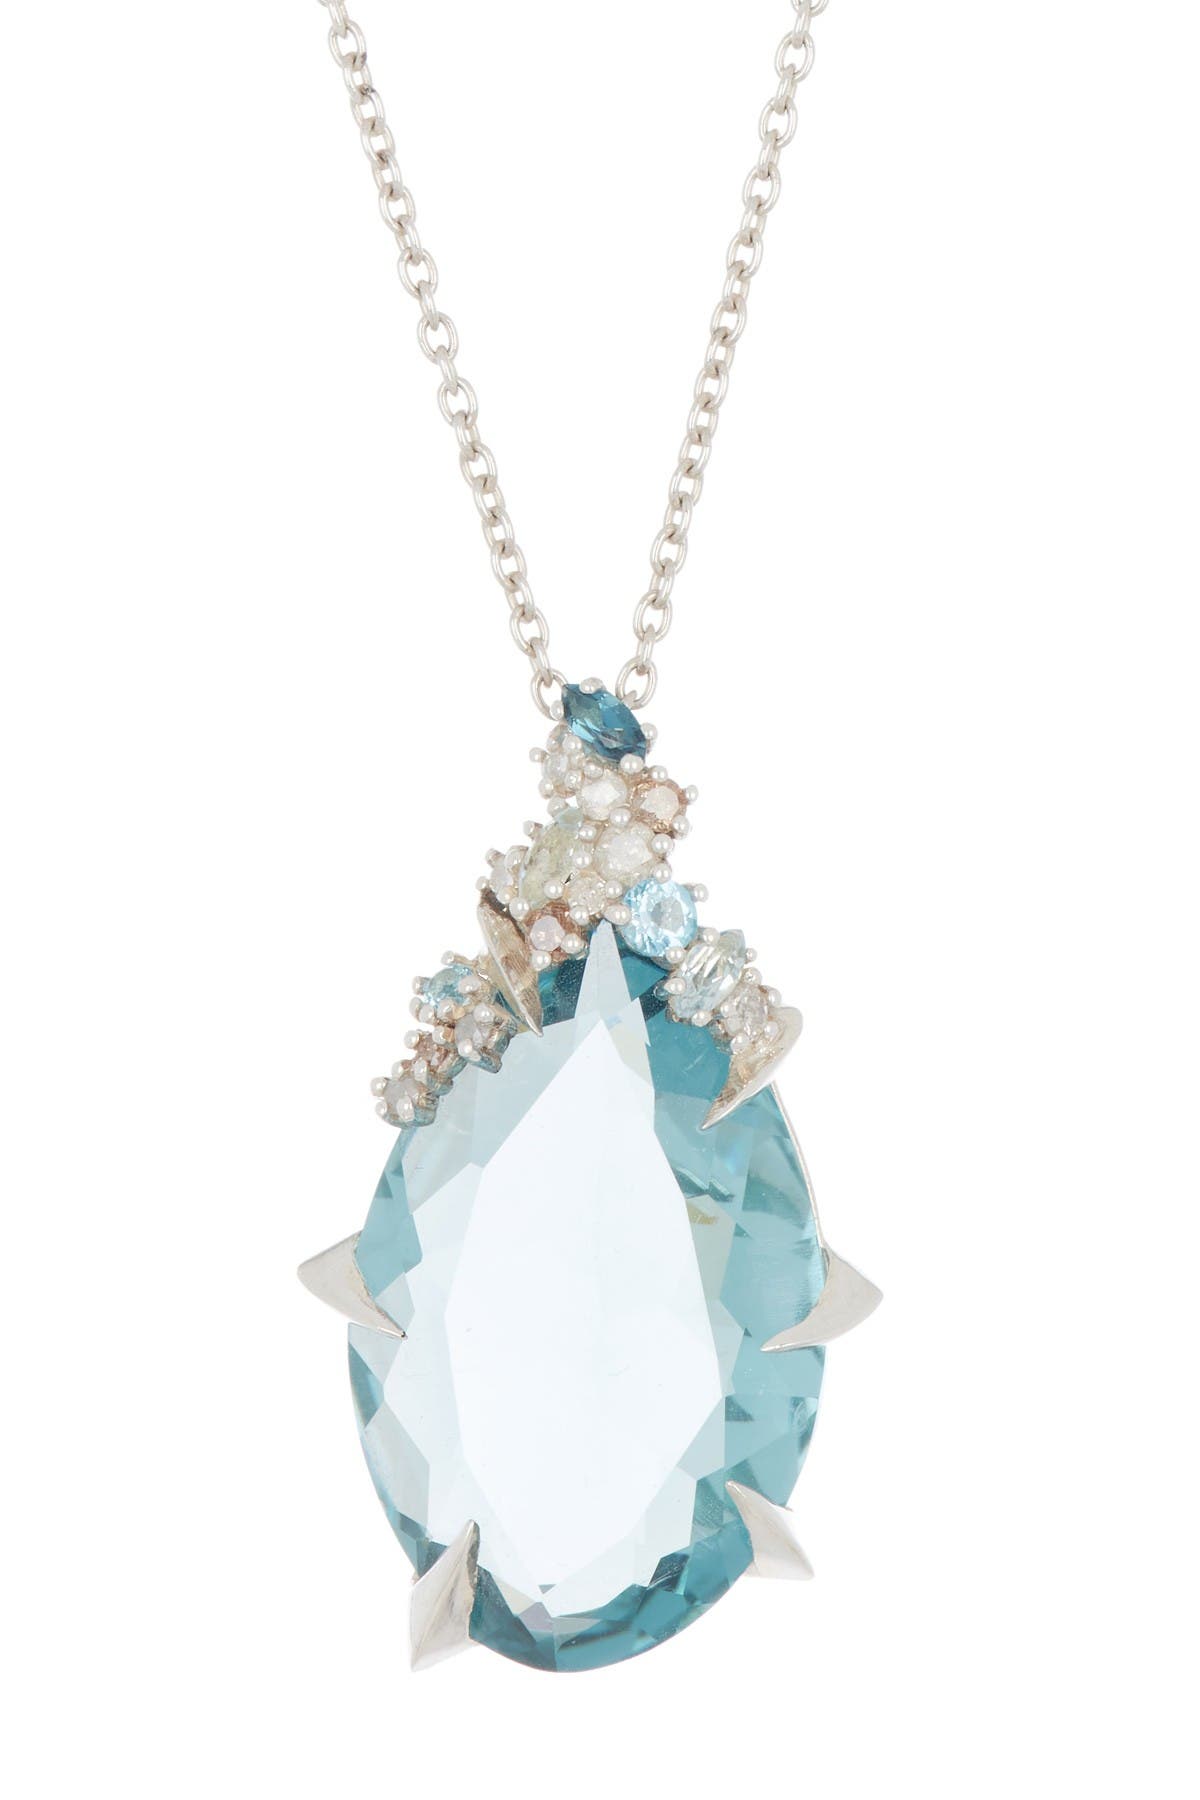 Alexis Bittar Sterling Silver Quartz With Diamond & Topaz Cluster Pendant Necklace In D Lbt Ss